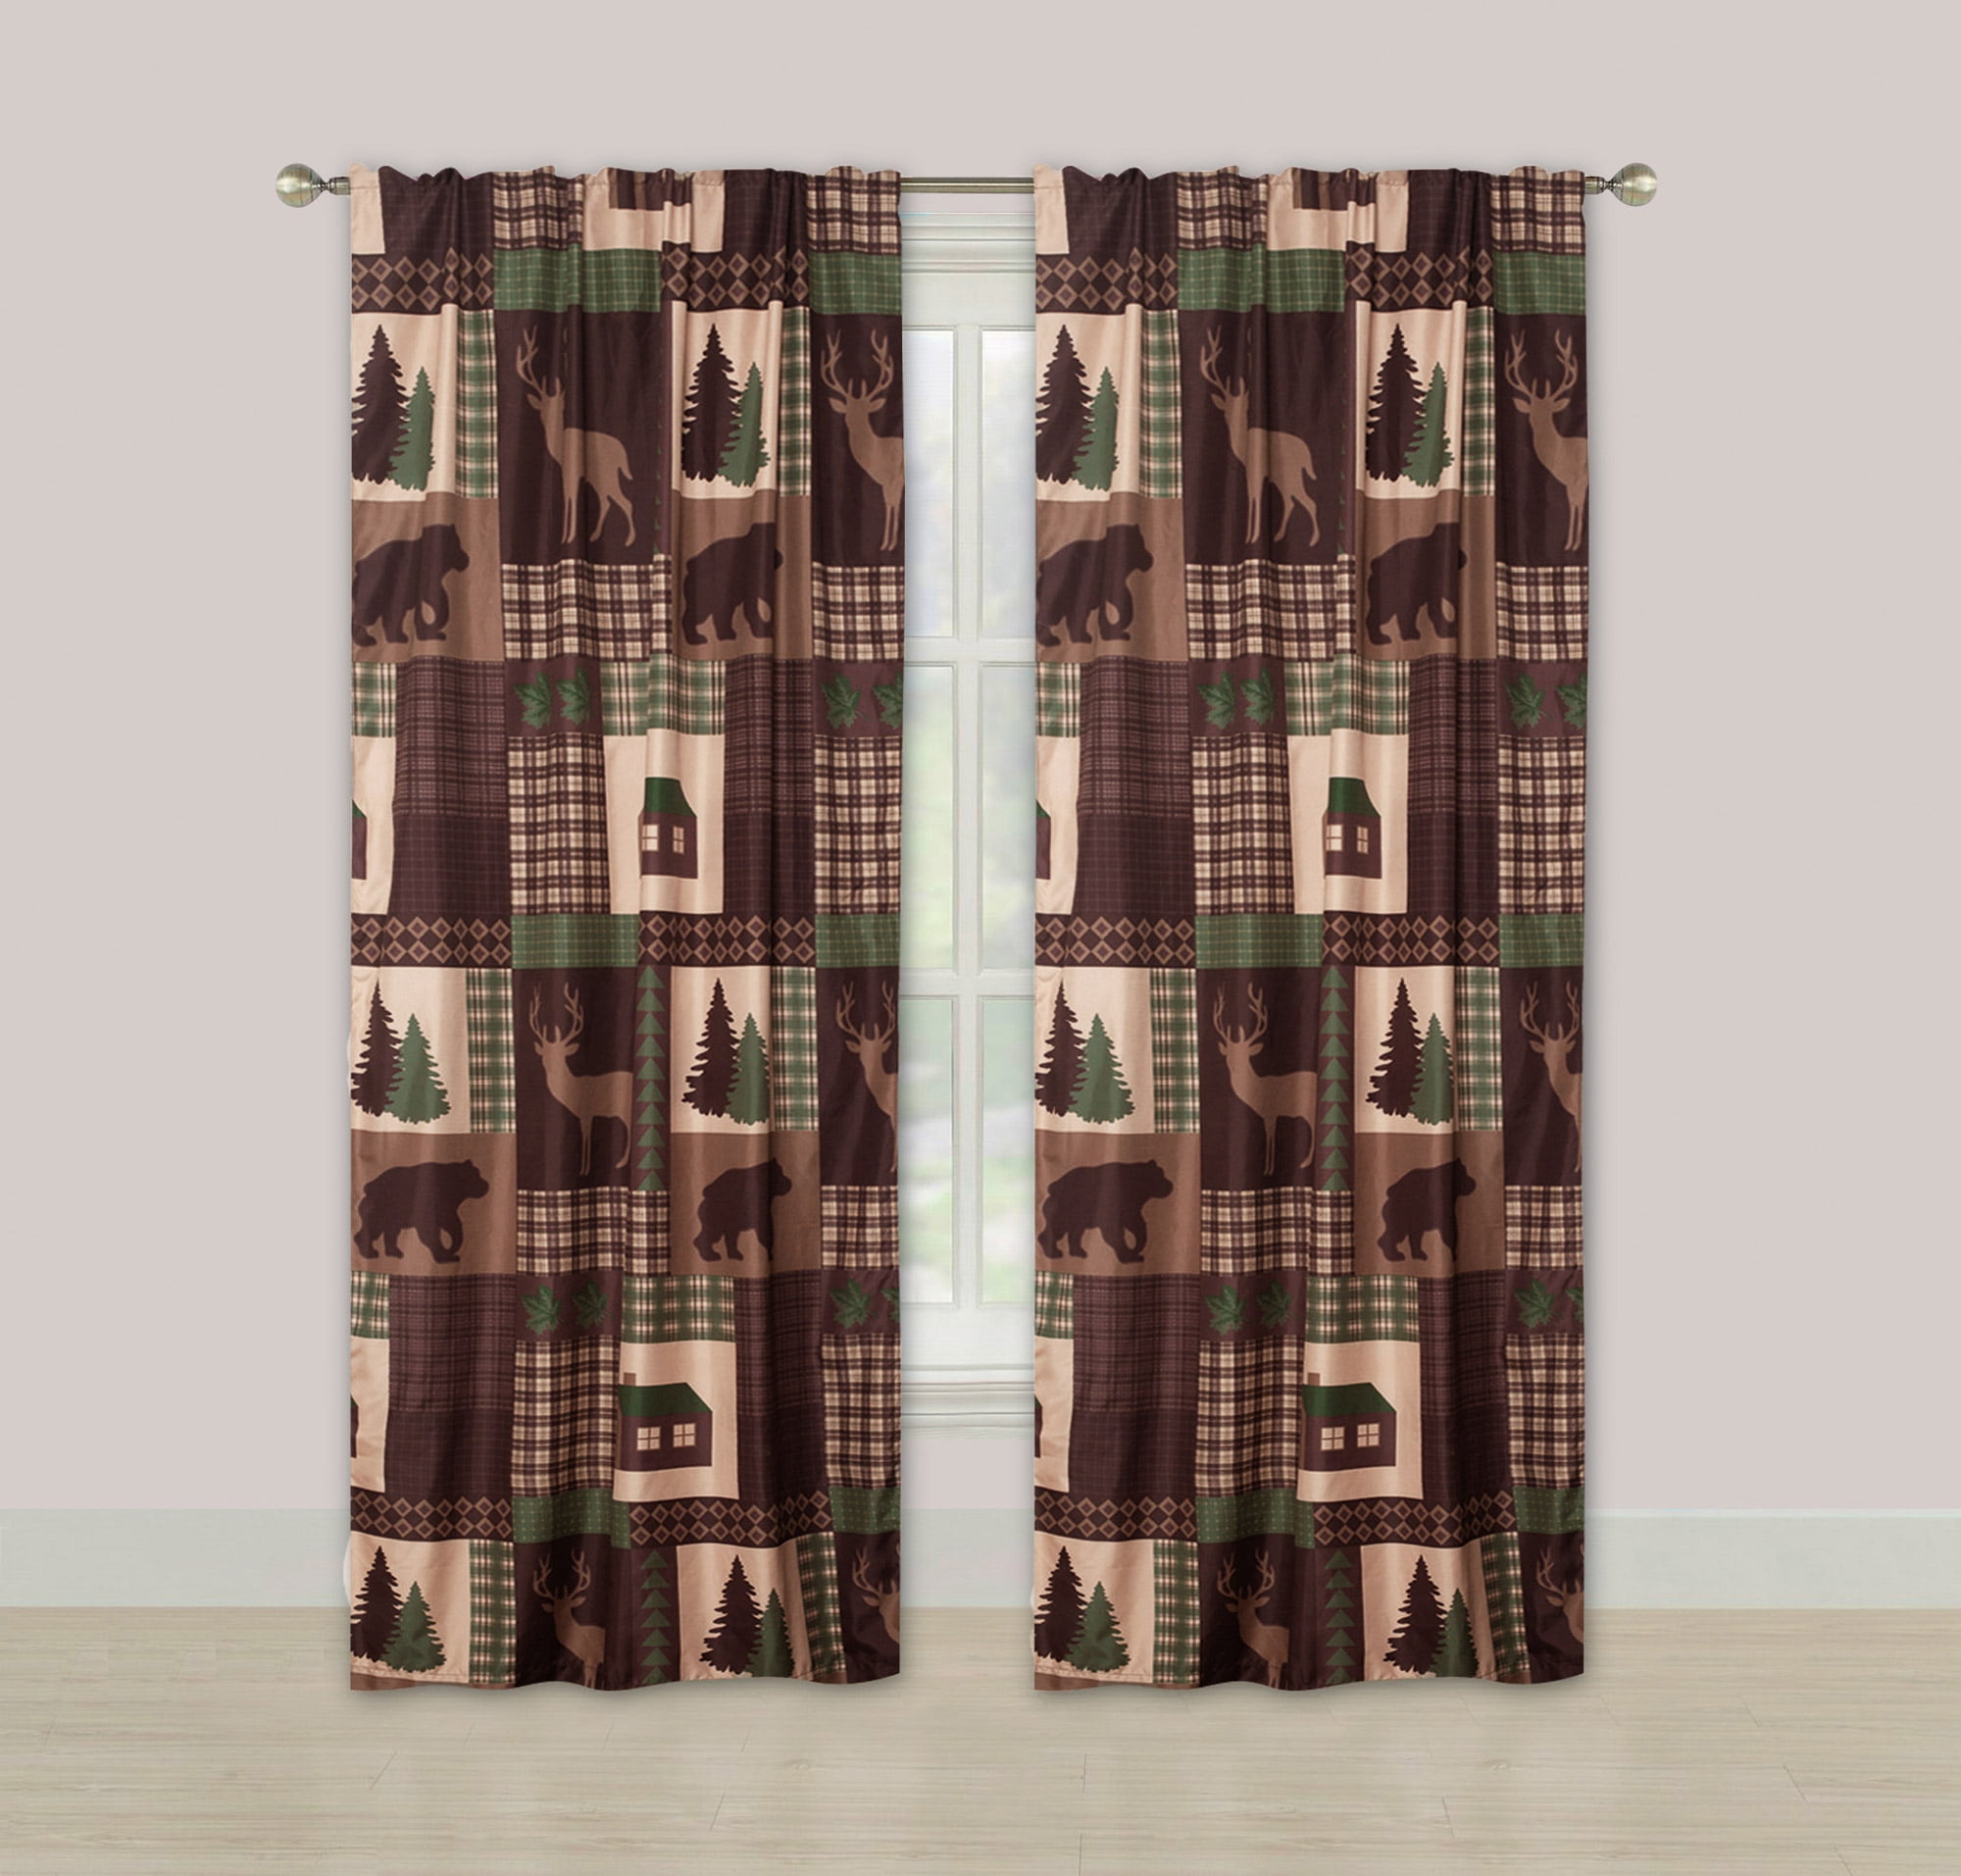 TIE BACKS & VALANCE CAMO CAMOUFLAGE THE WOODS NEW 5 PC CURTAIN SET with PANELS 